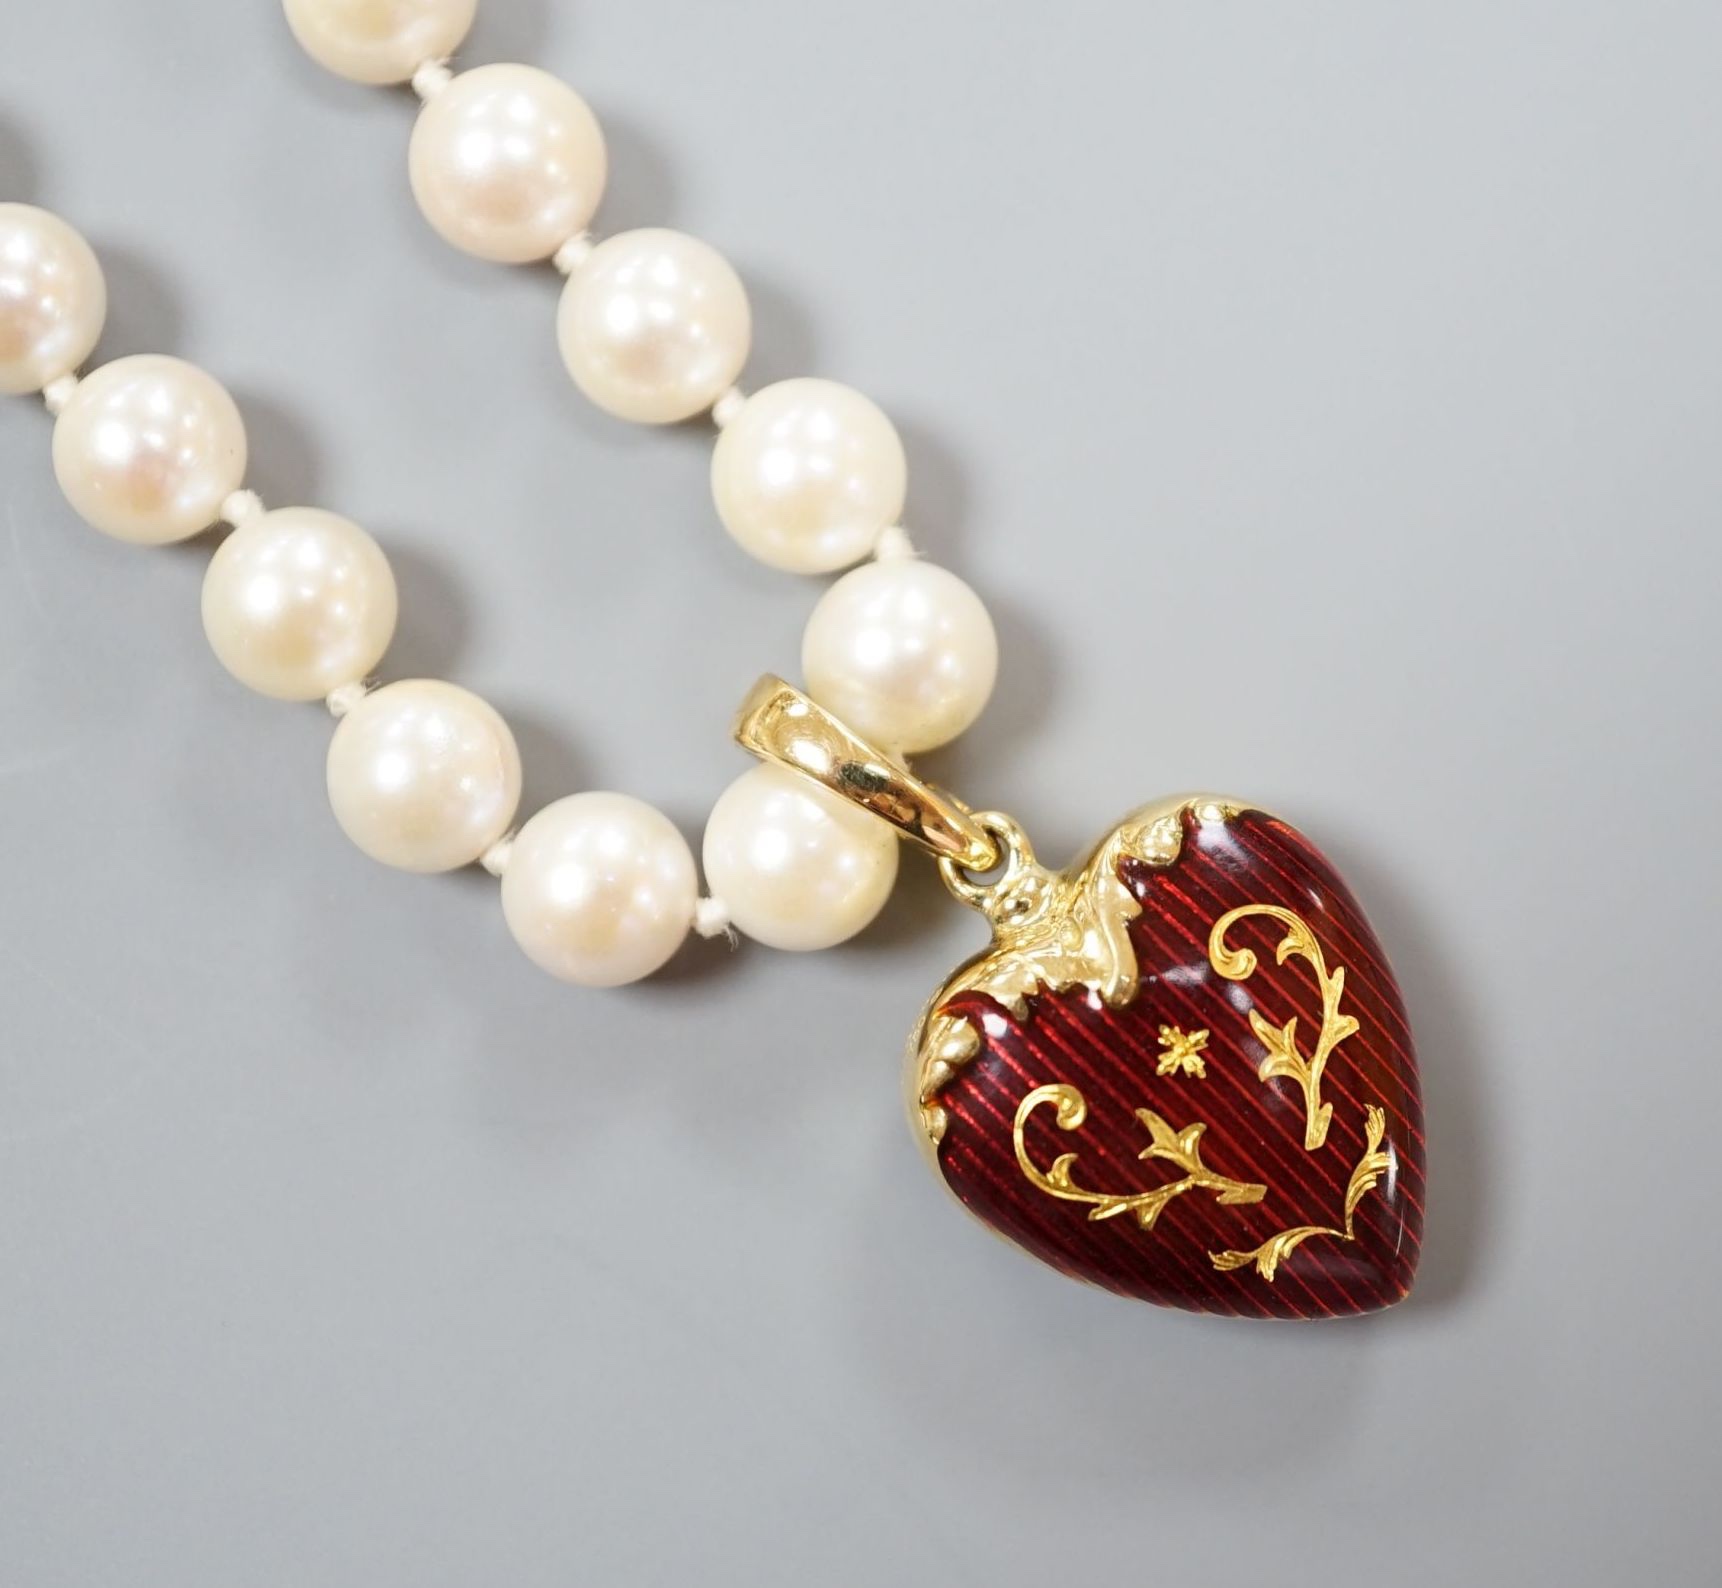 A modern Victor Mayer for Faberge 18ct gold and red guilloche enamel pendant, 19mm, on a single strand cultured pearl necklace, with 14k clasp, 50cm, gross weight 30.7 grams, with box and certificate.